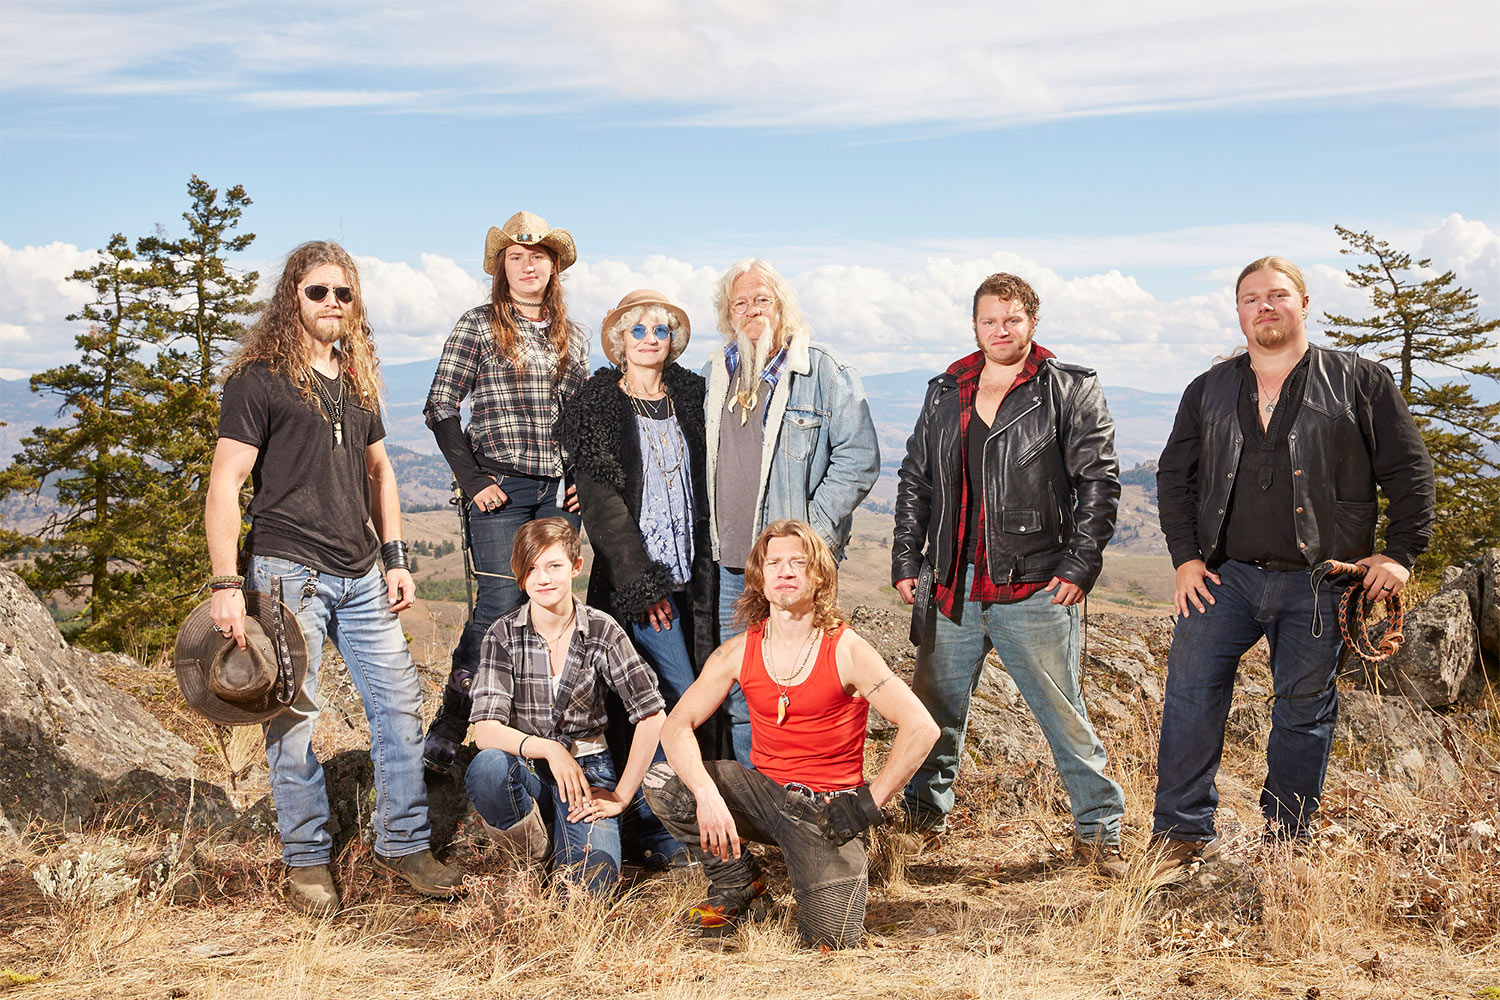 The trailer for "Alaskan Bush People" Season 13 shows Billy Brown's final scenes and funeral